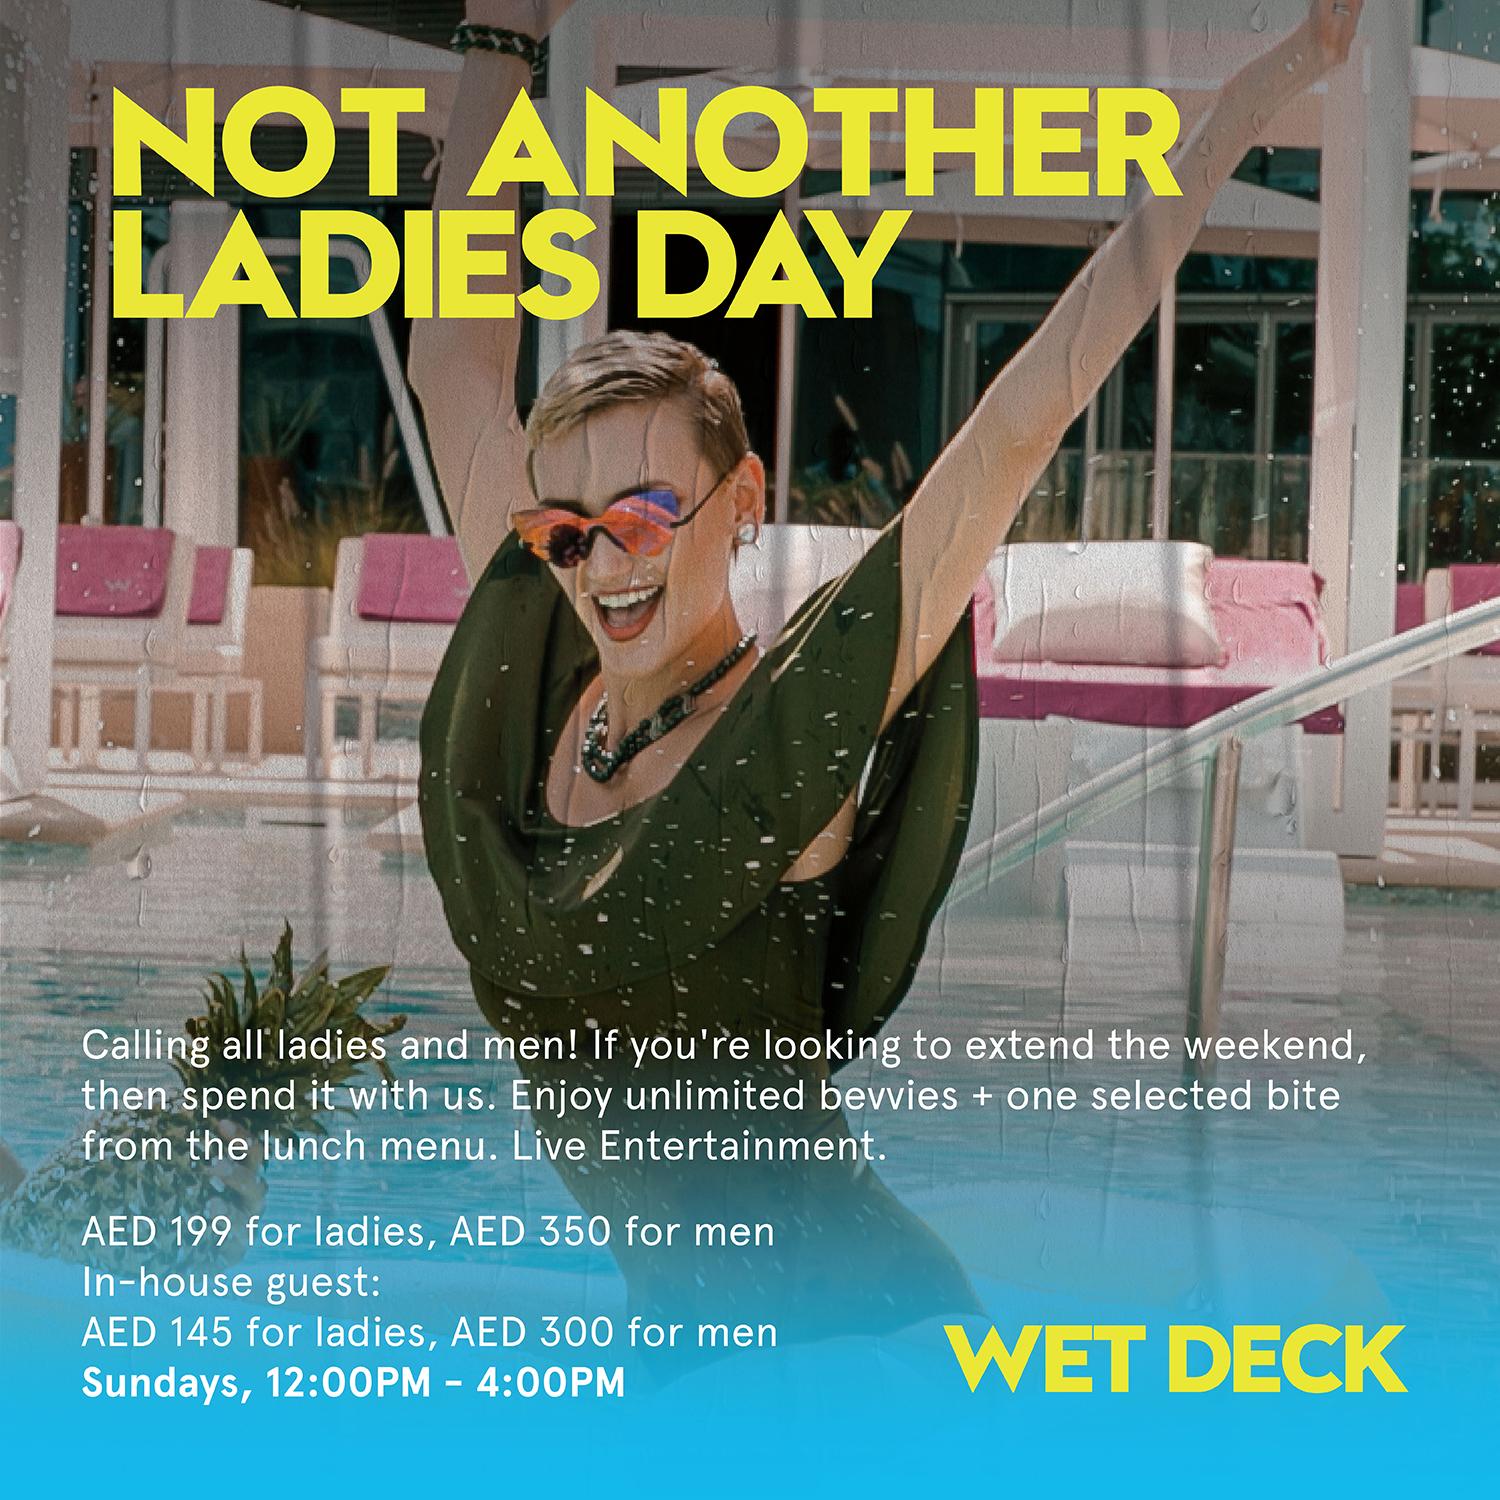 NOT ANOTHER LADIES DAY - SUNDAY LADIES DAY